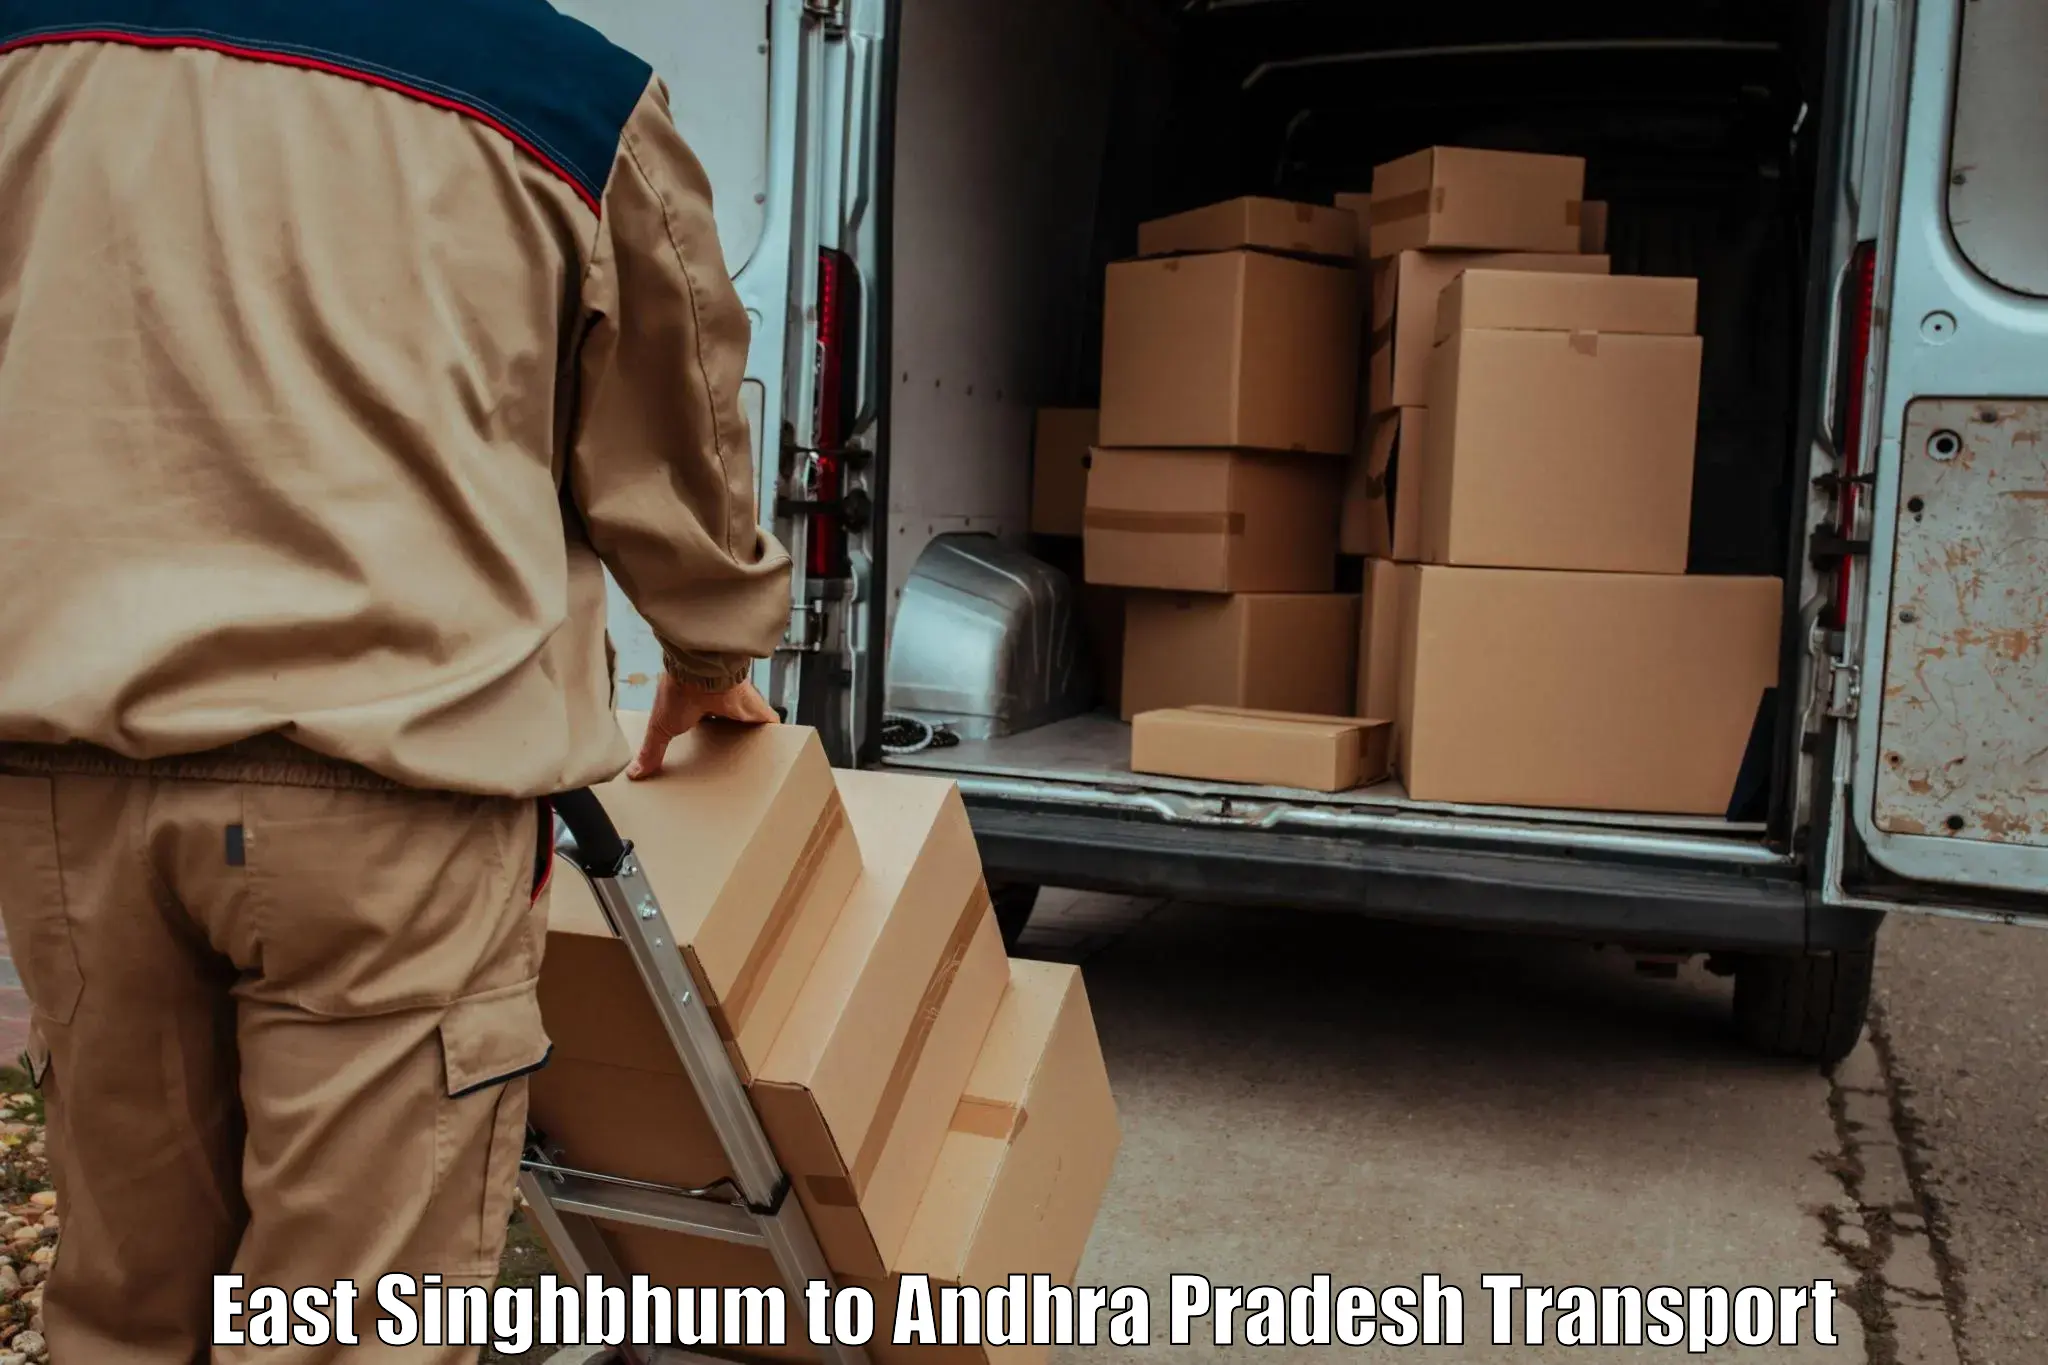 Part load transport service in India East Singhbhum to Gampalagudem